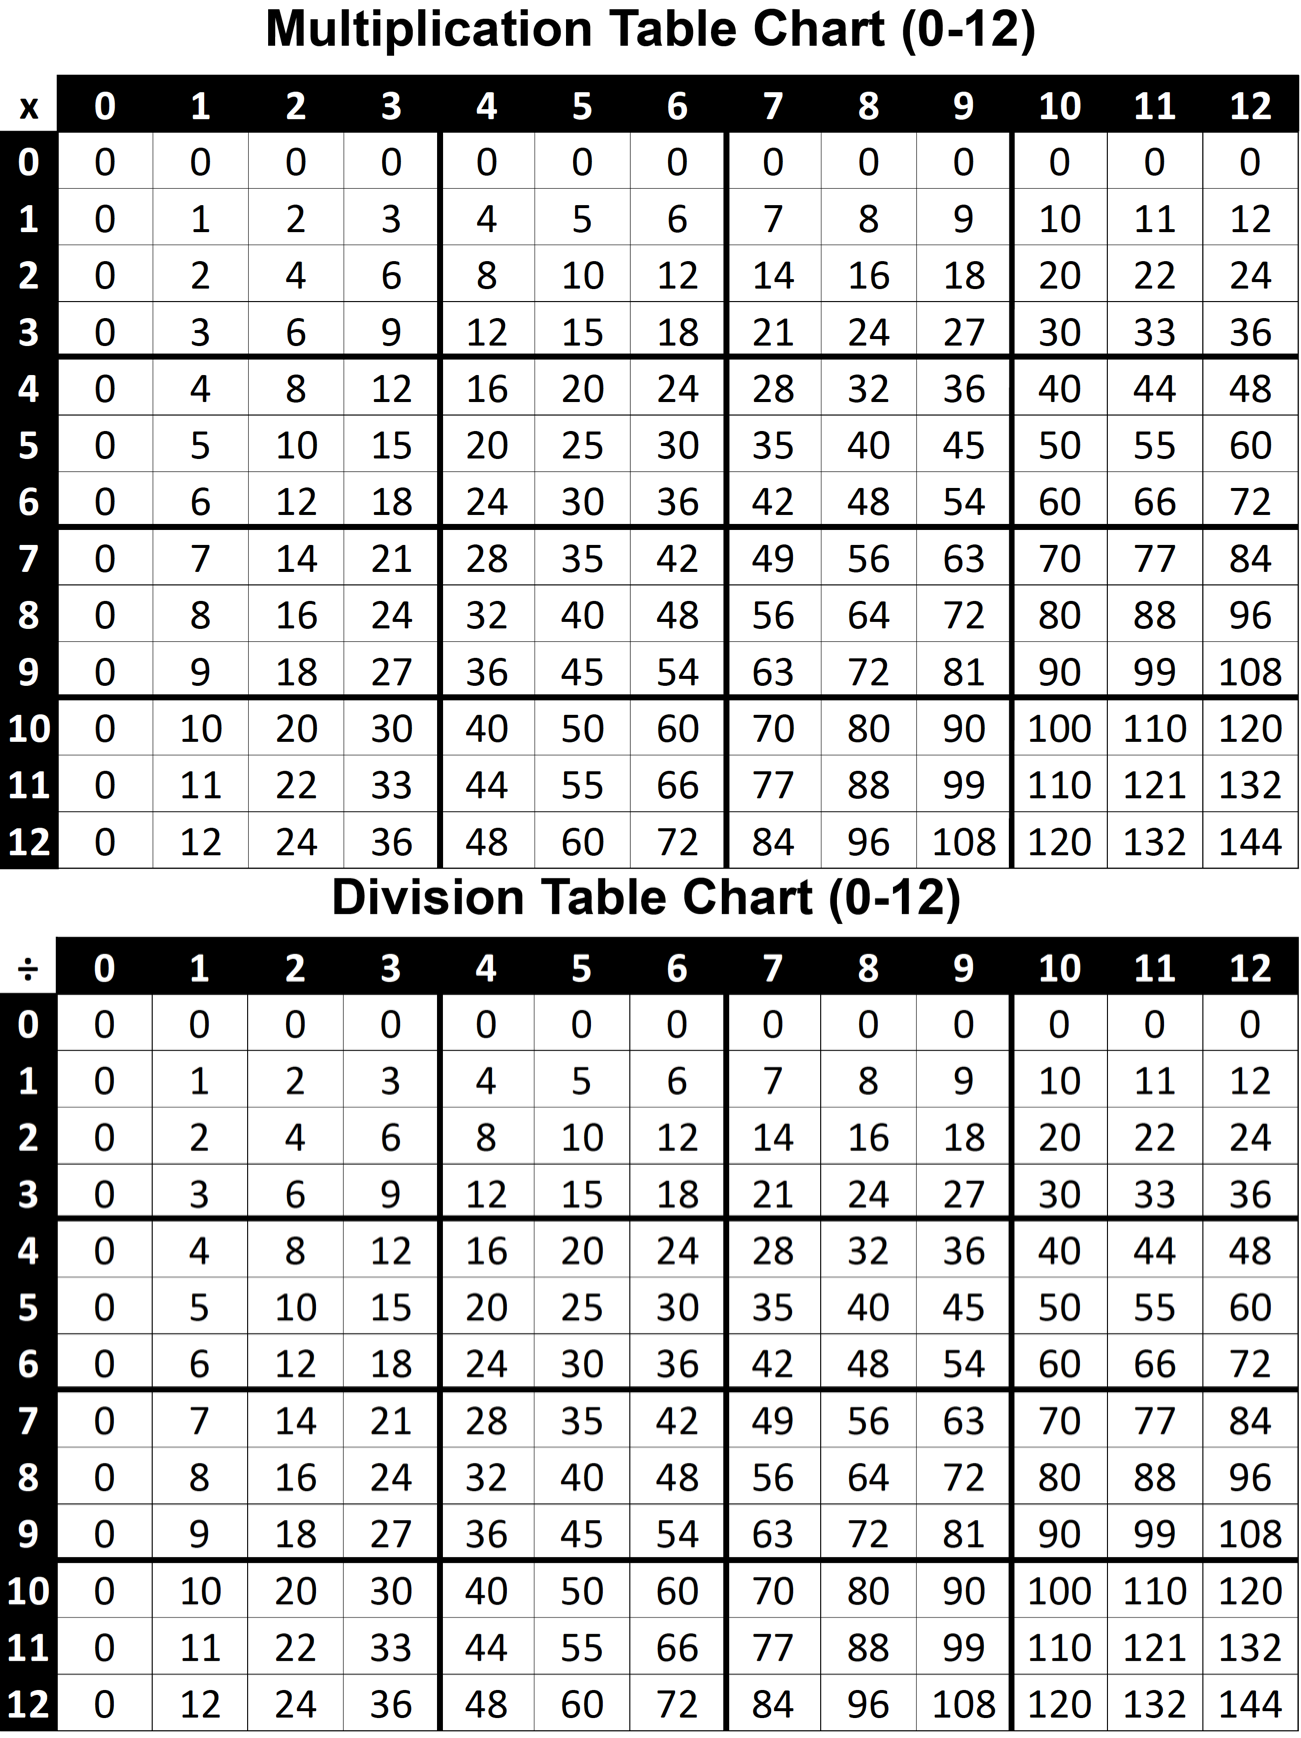 Multiplication & Division Table Charts 0-12 Printable PDF (FREE)